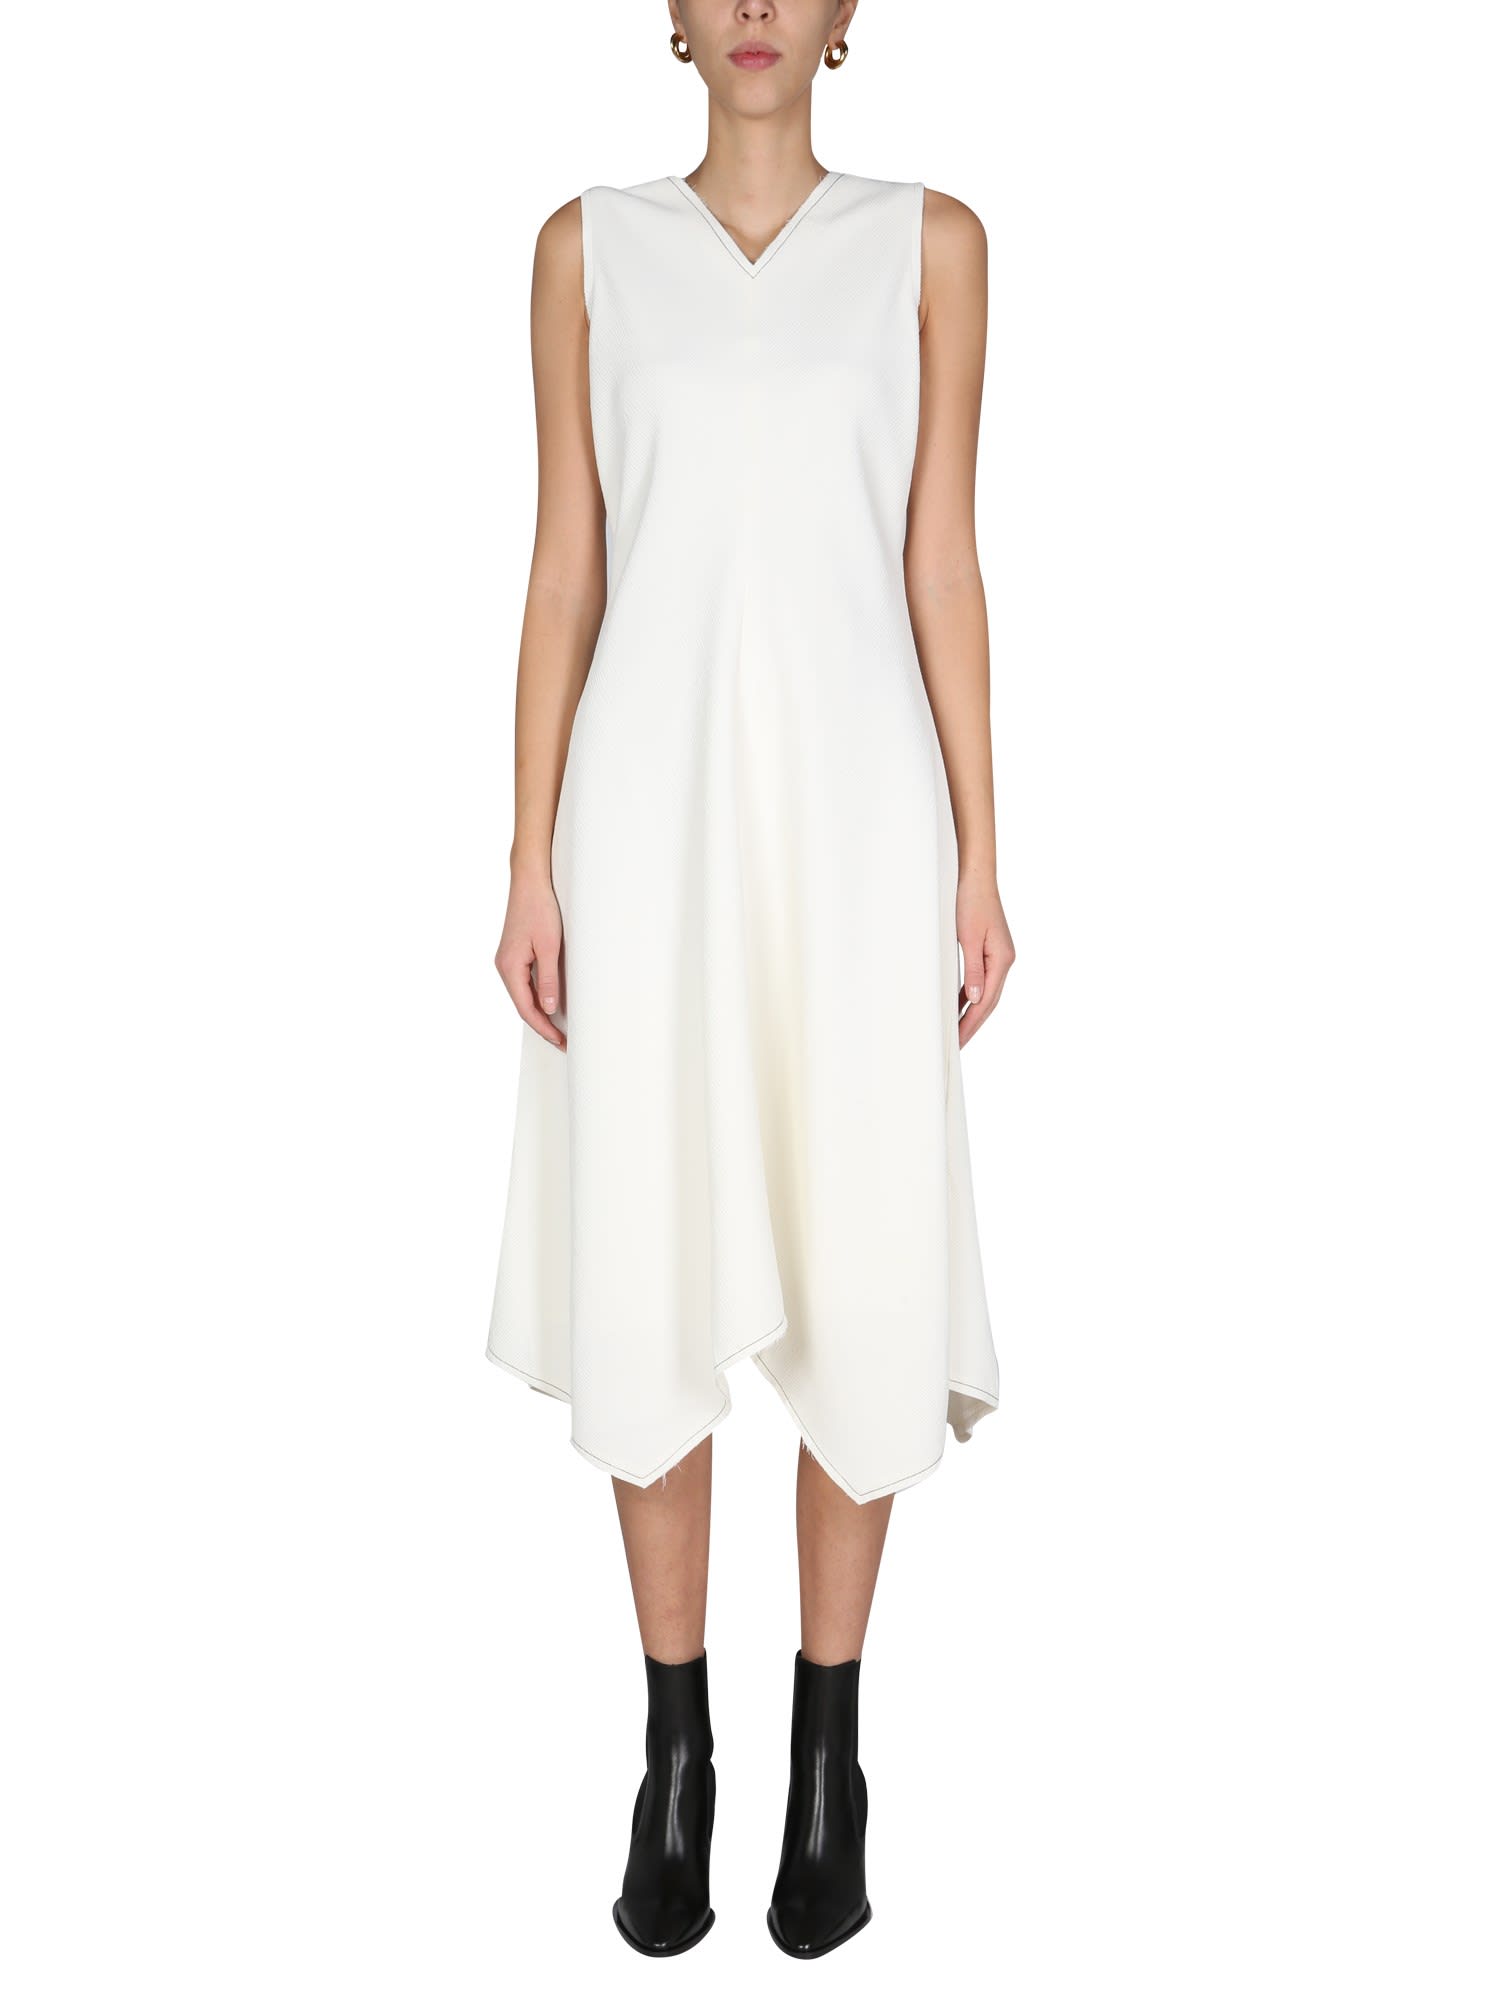 Proenza Schouler White Label Ribbed Dress